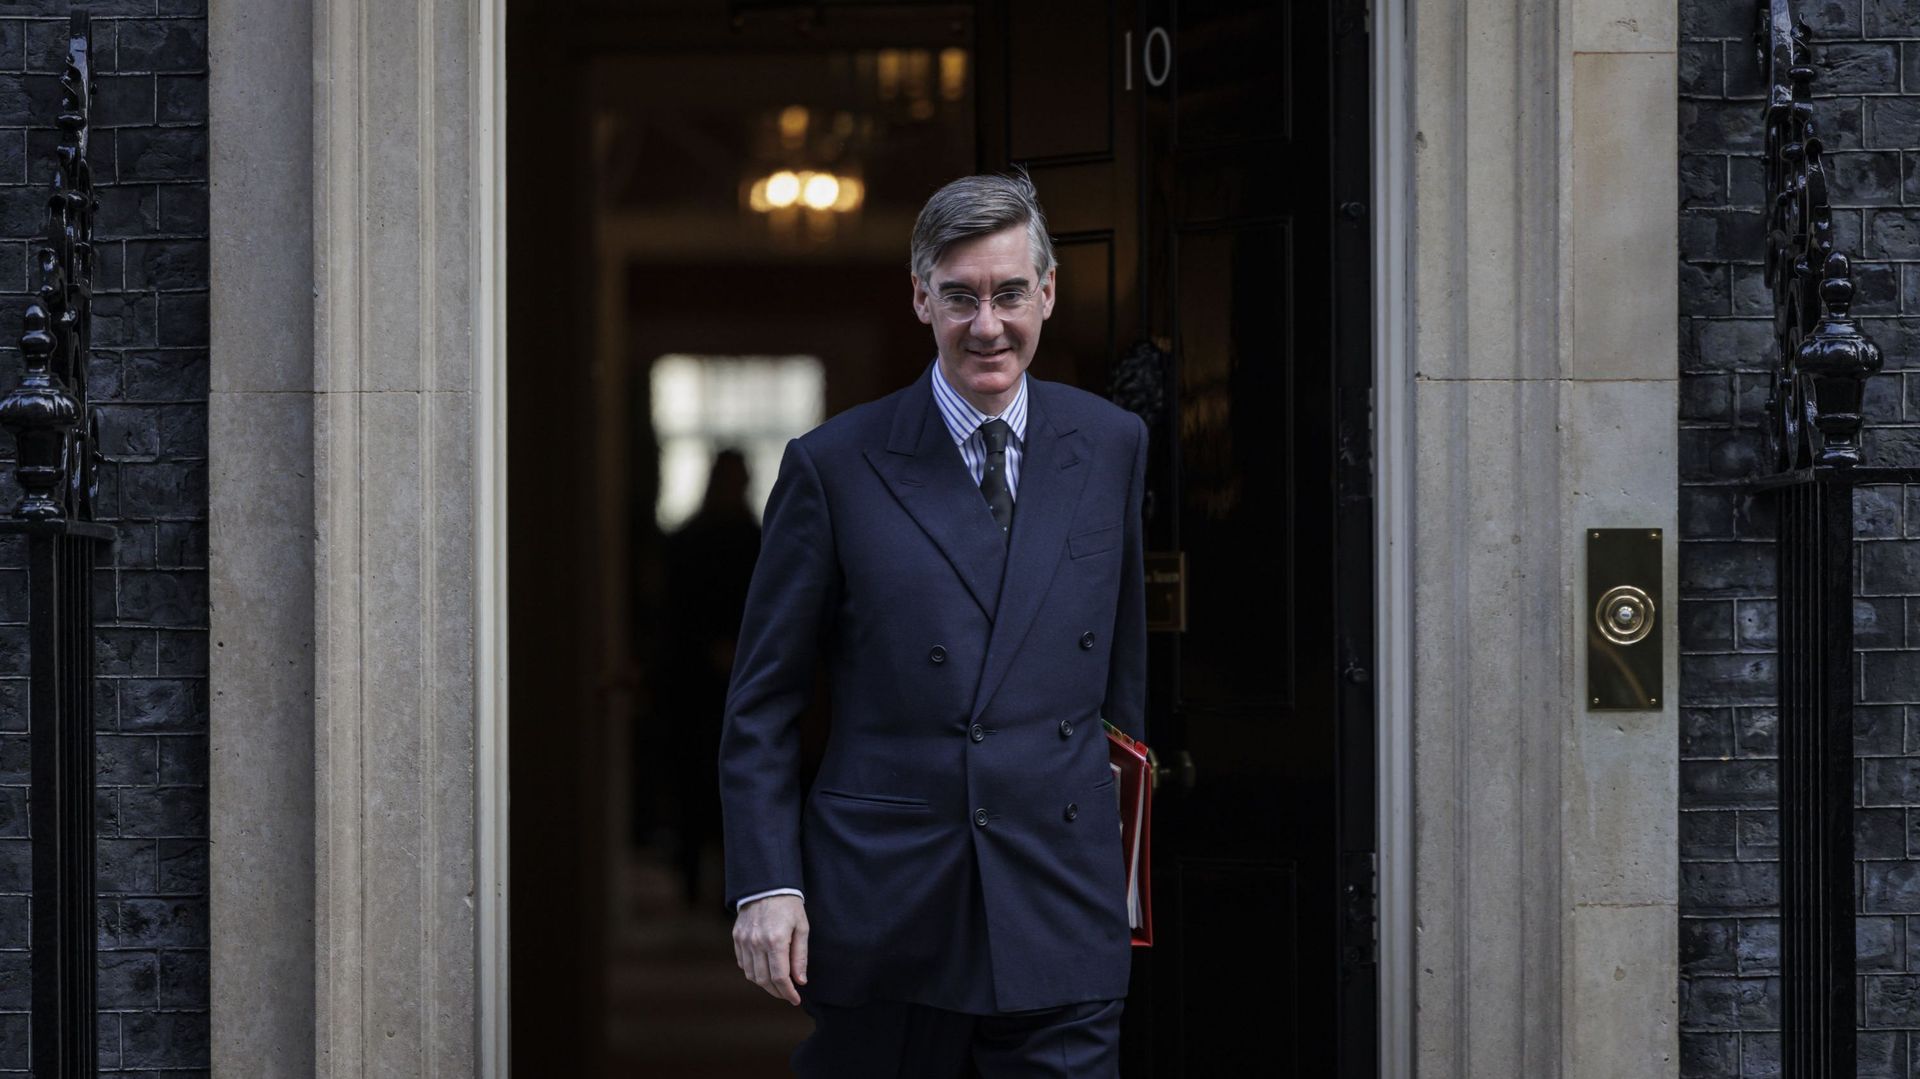 Jacob Rees-Mogg quittant le 10, Downing Street